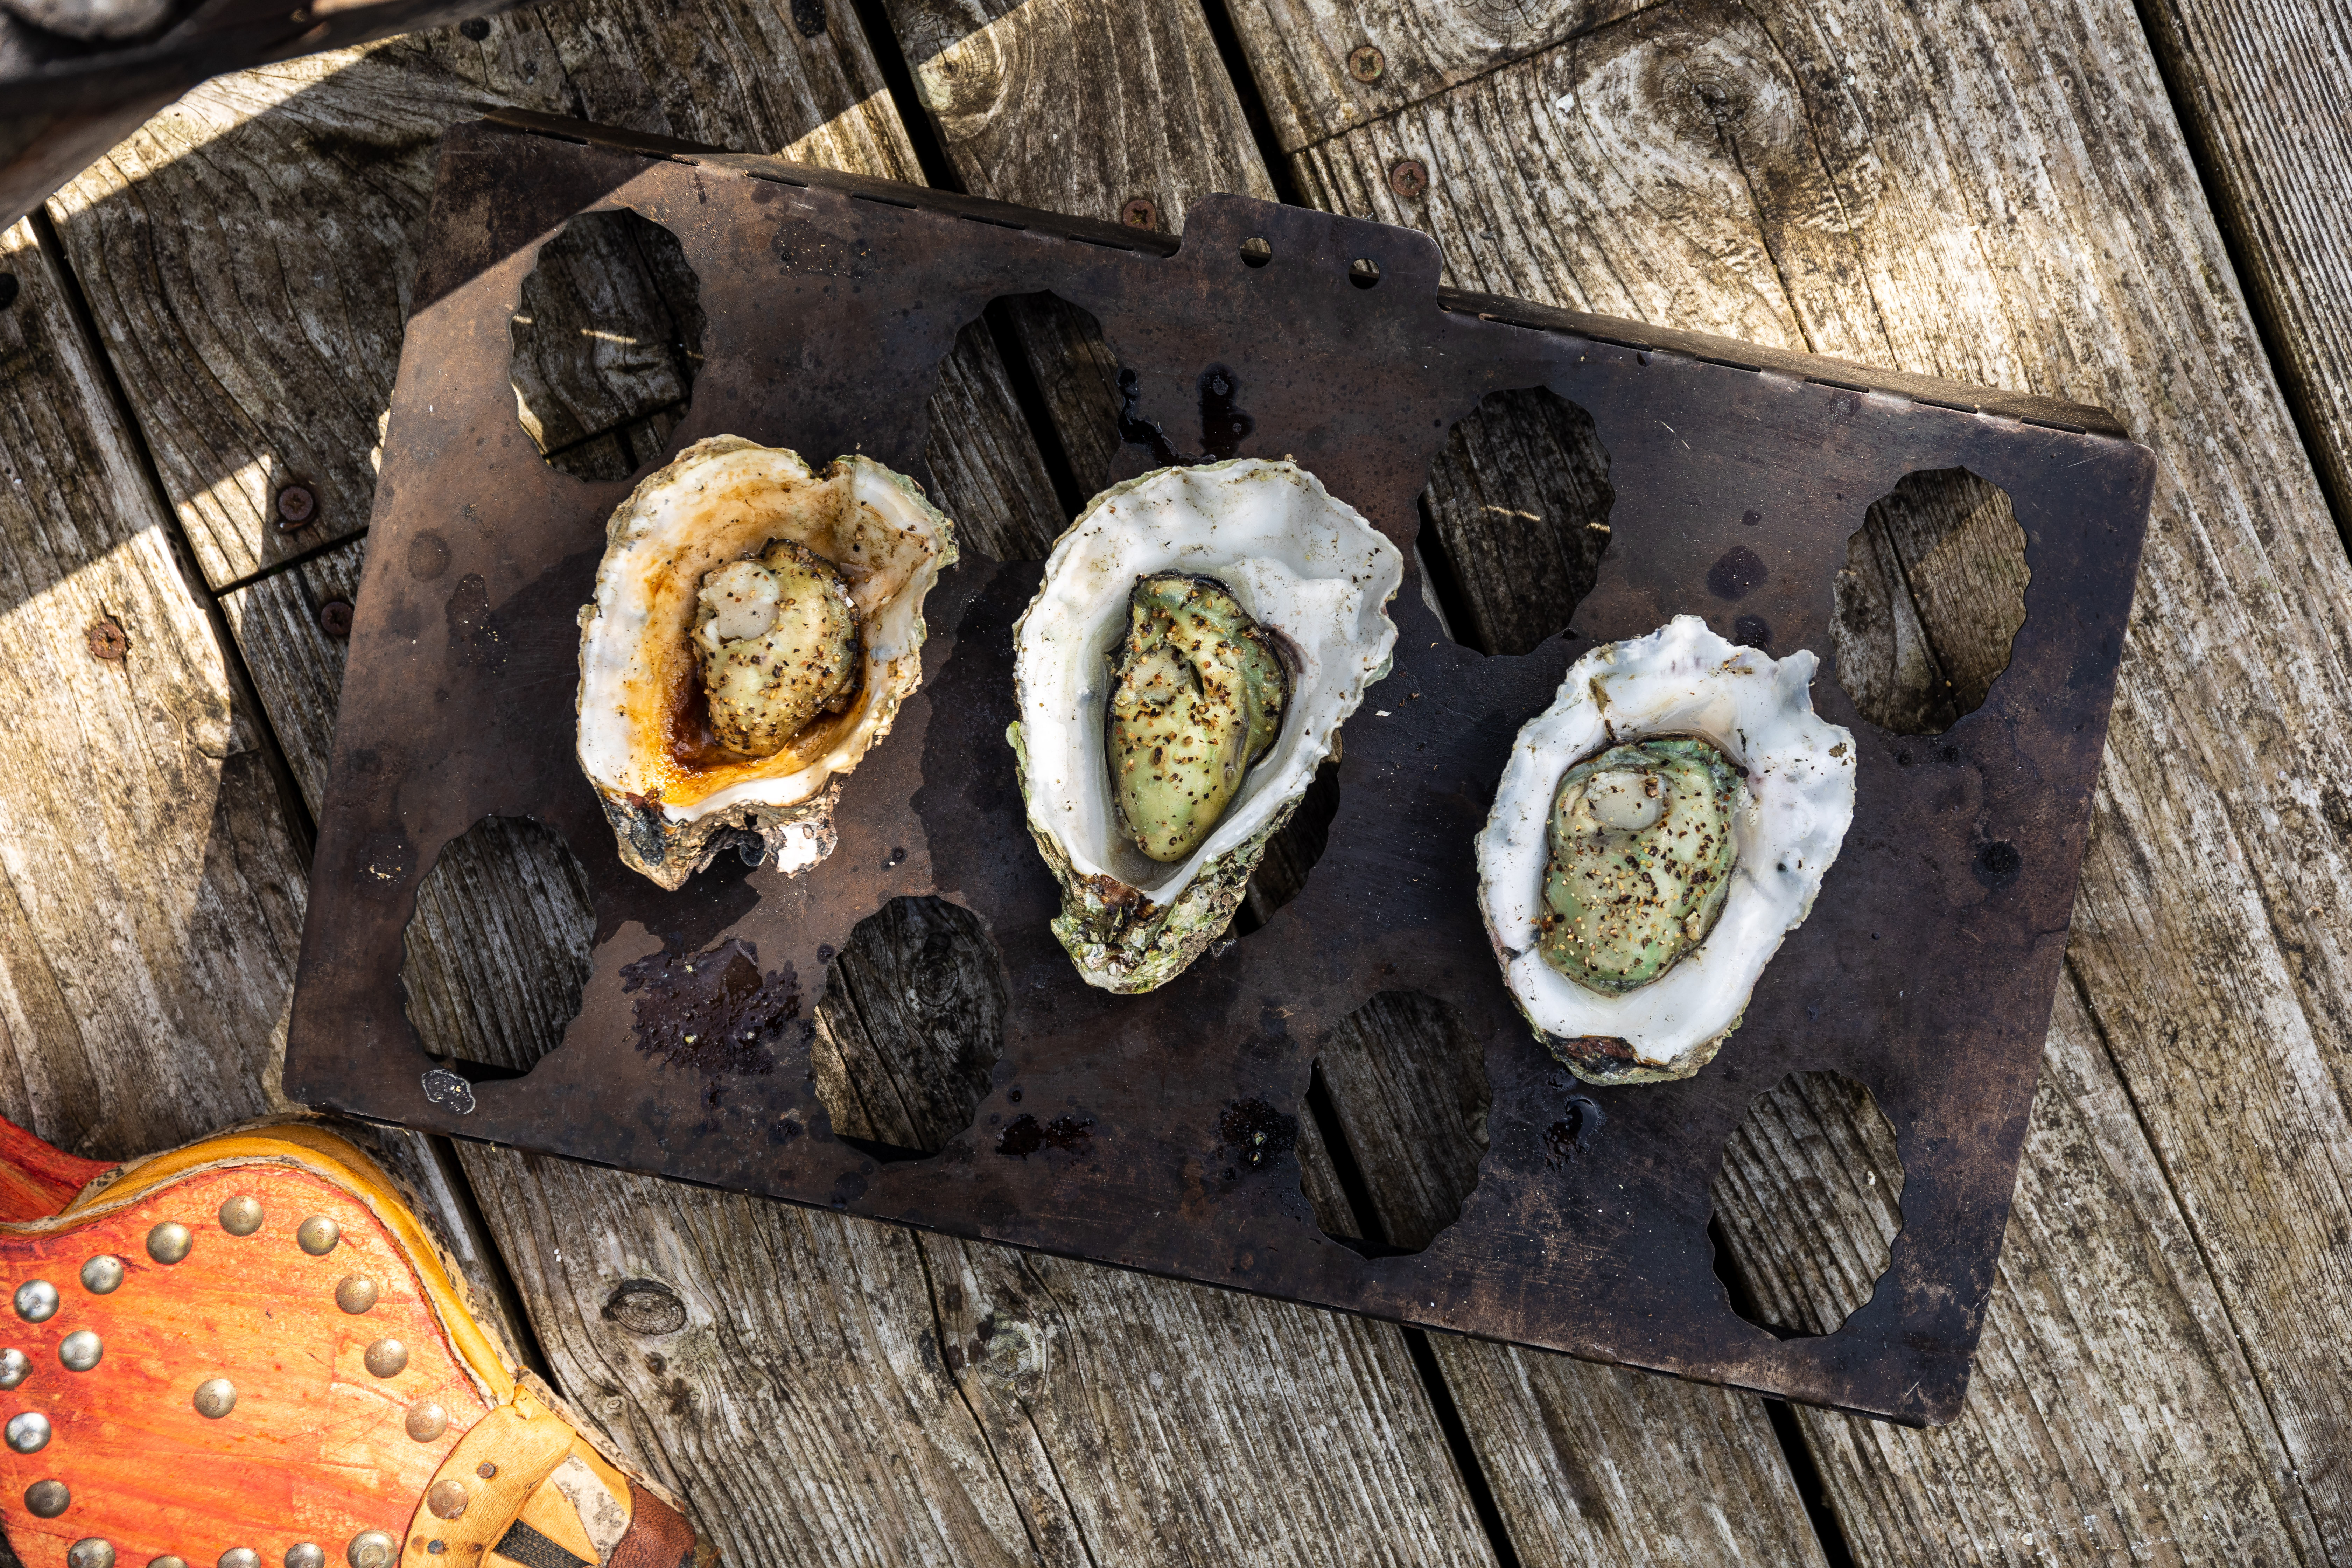 BBQ Oysters by Mike Searle